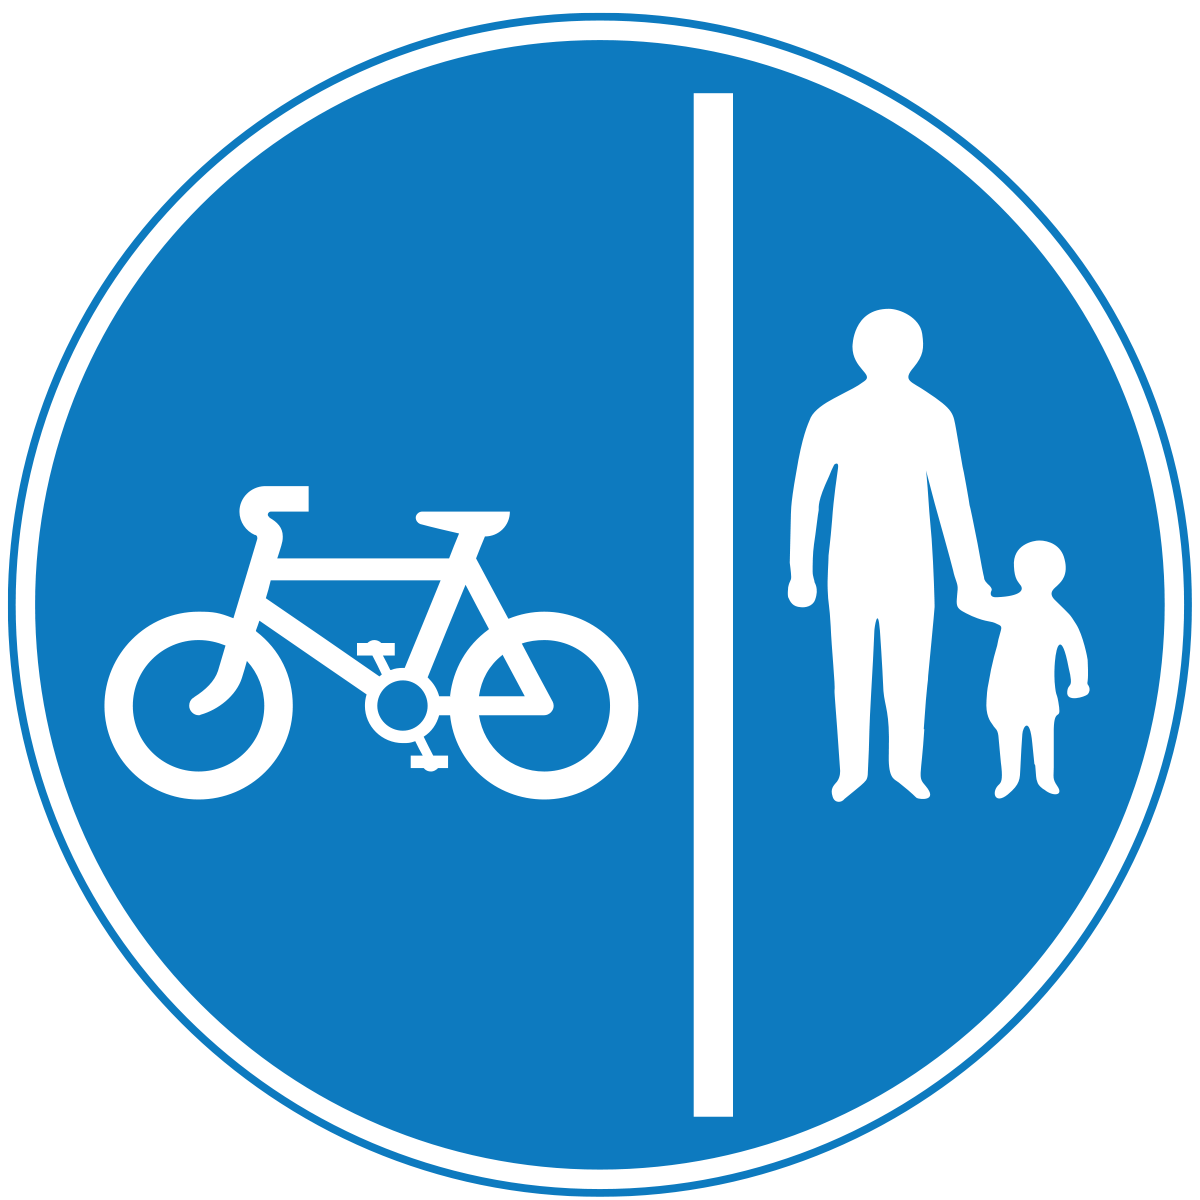 Segregated route for pedal cycles and pedestrians (Cycles on left; pedestrians on right). Symbol may be reversed.